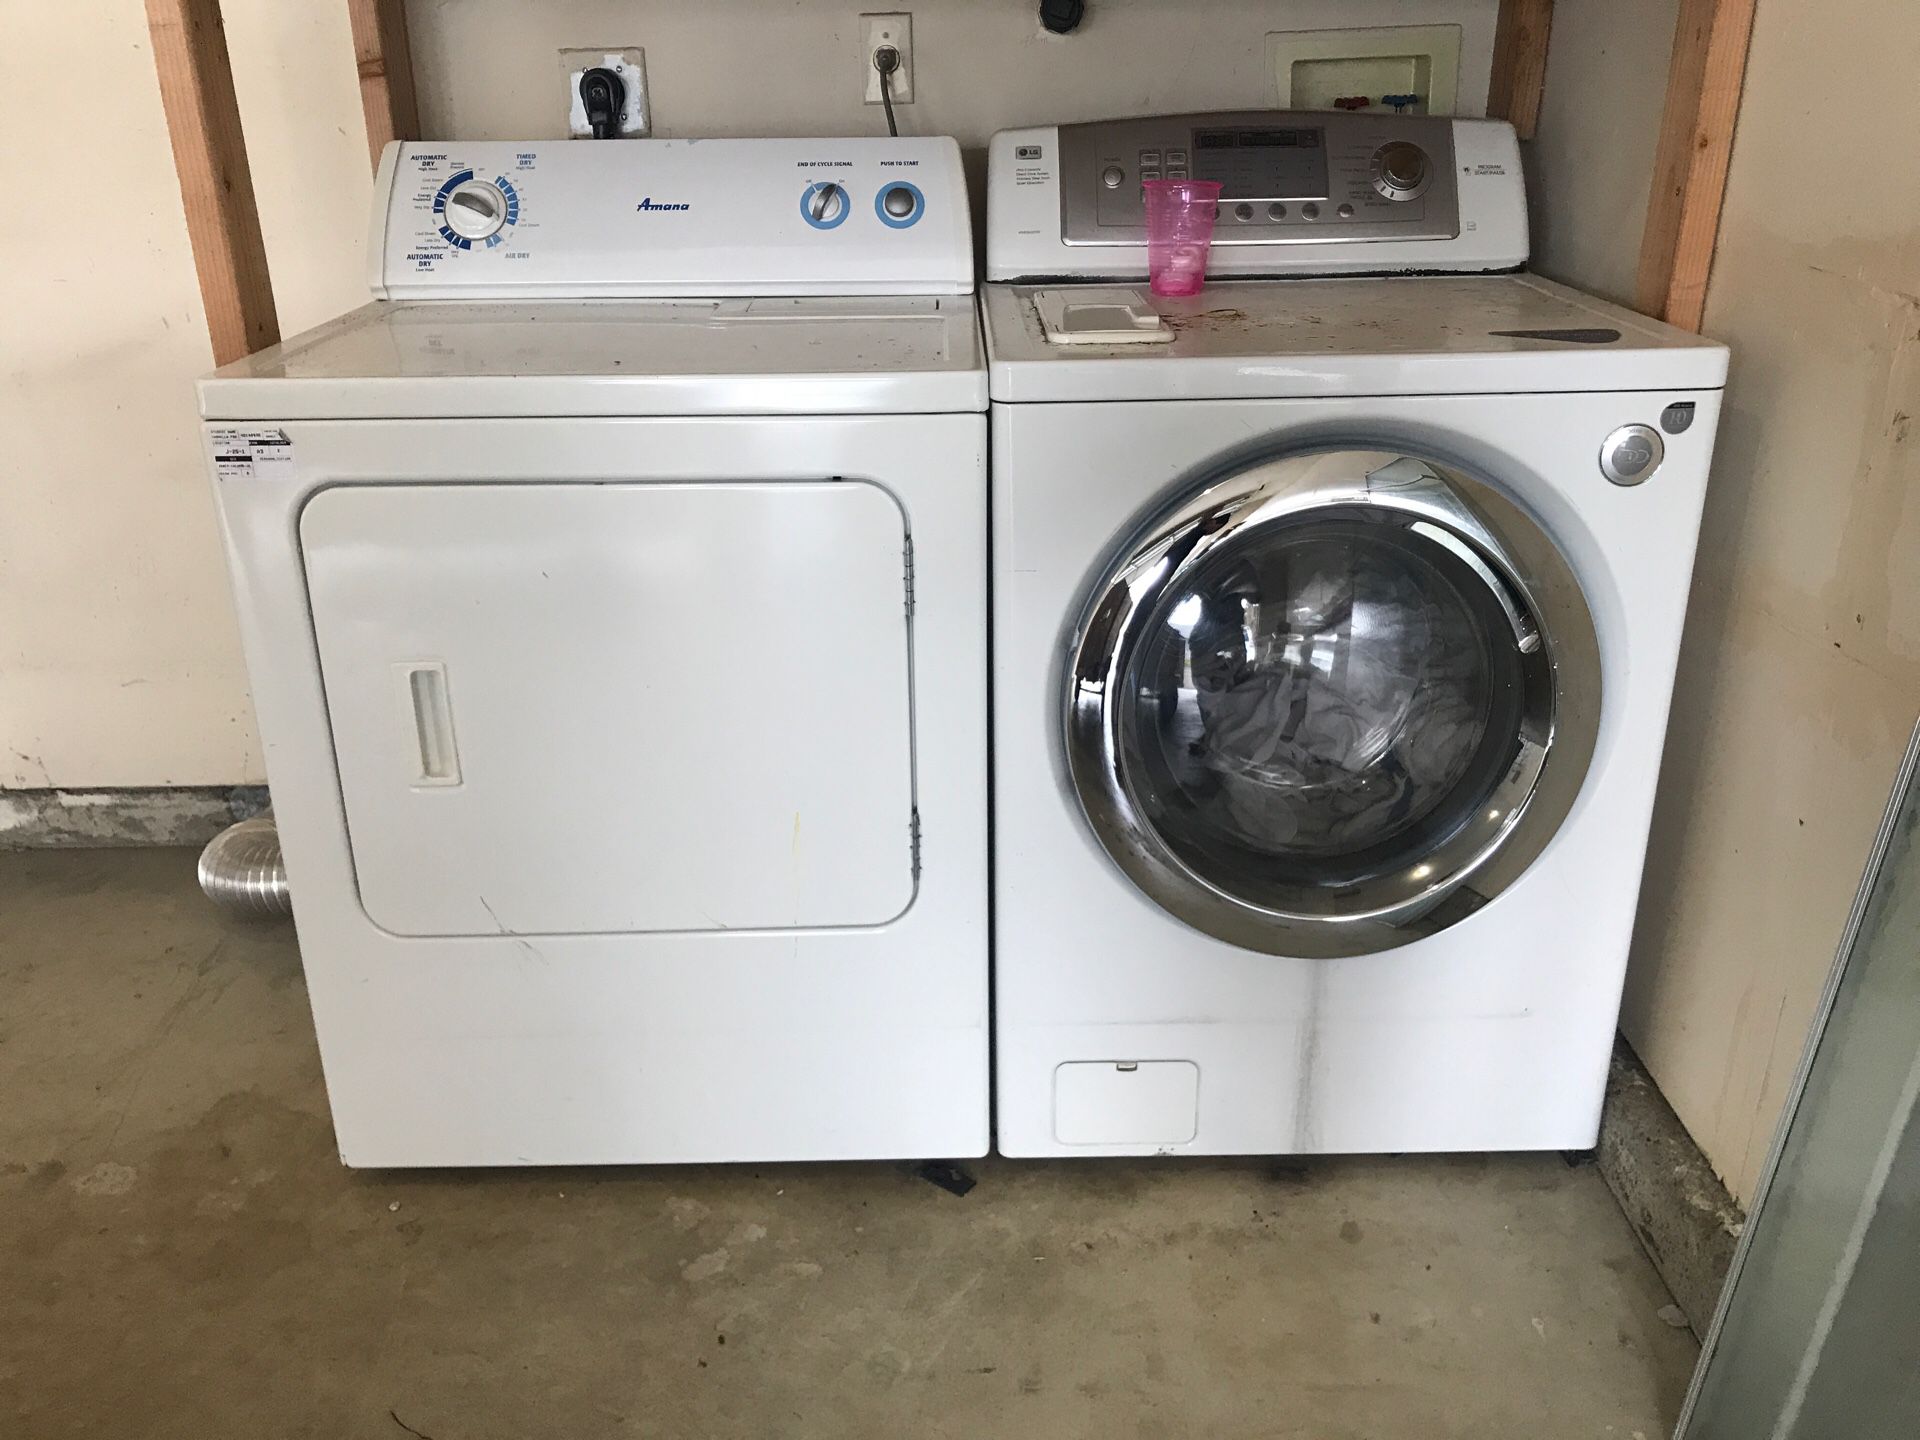 Washer and dryer still work great